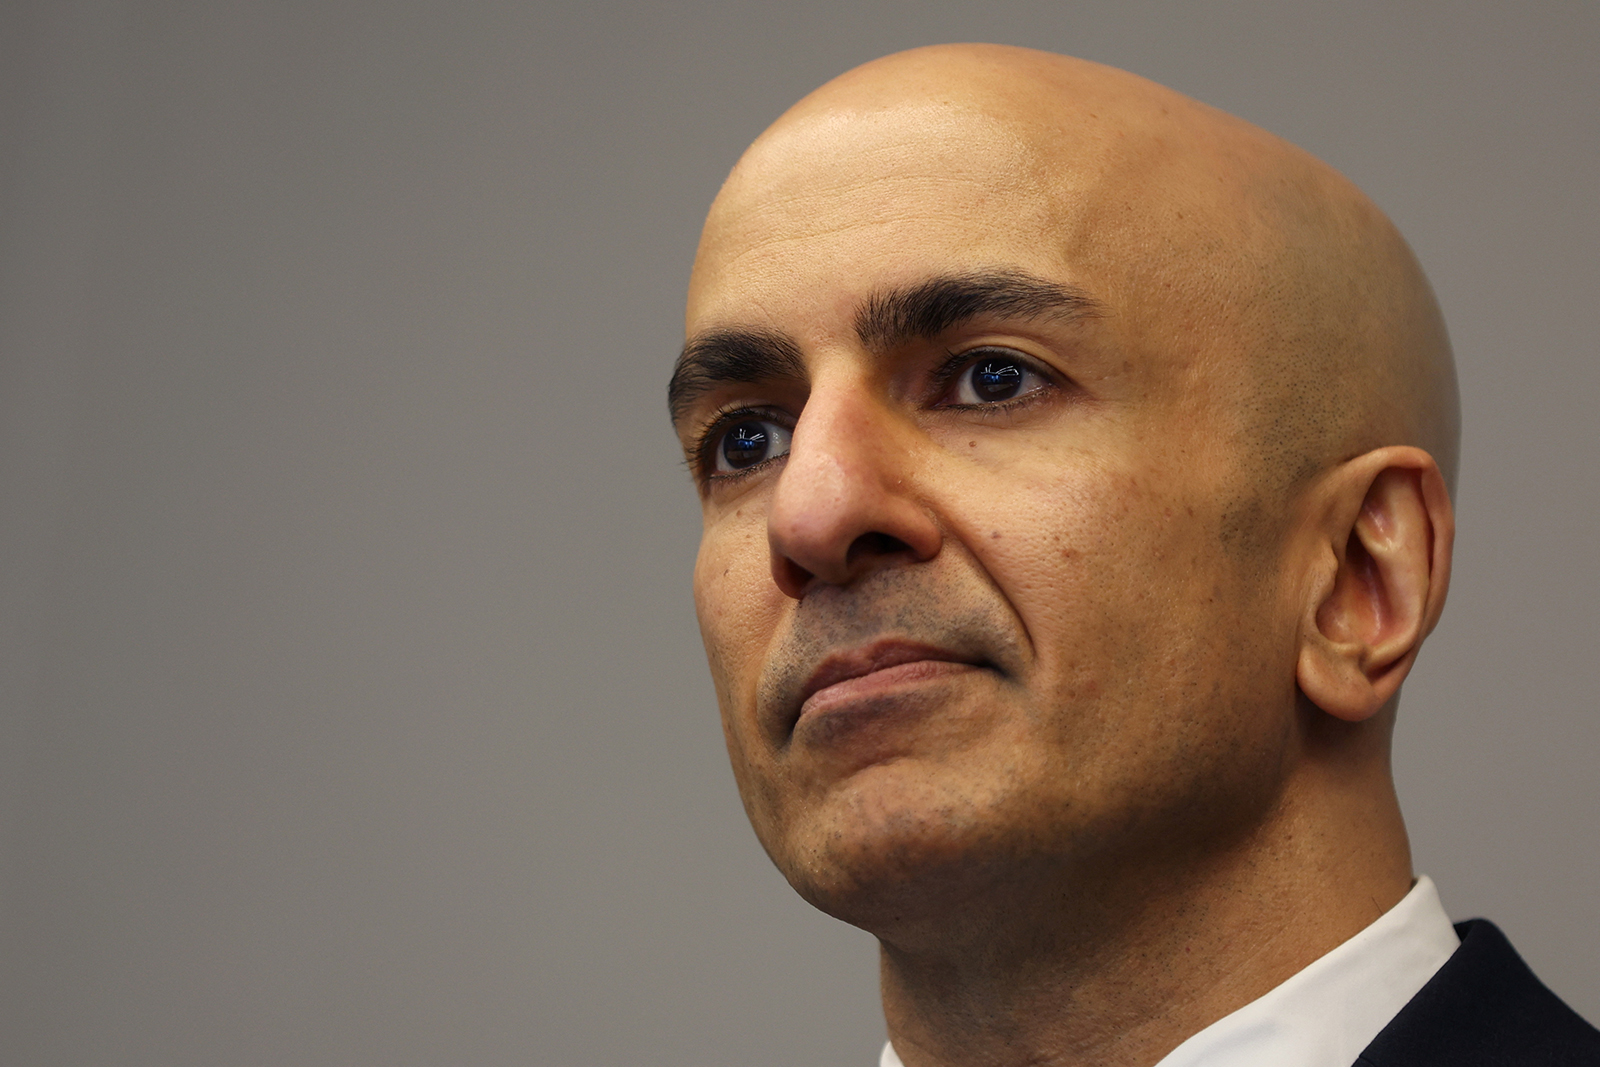 Neel Kashkari, President and CEO of the Federal Reserve Bank of Minneapolis, during an interview with Reuters in New York City on May 22.